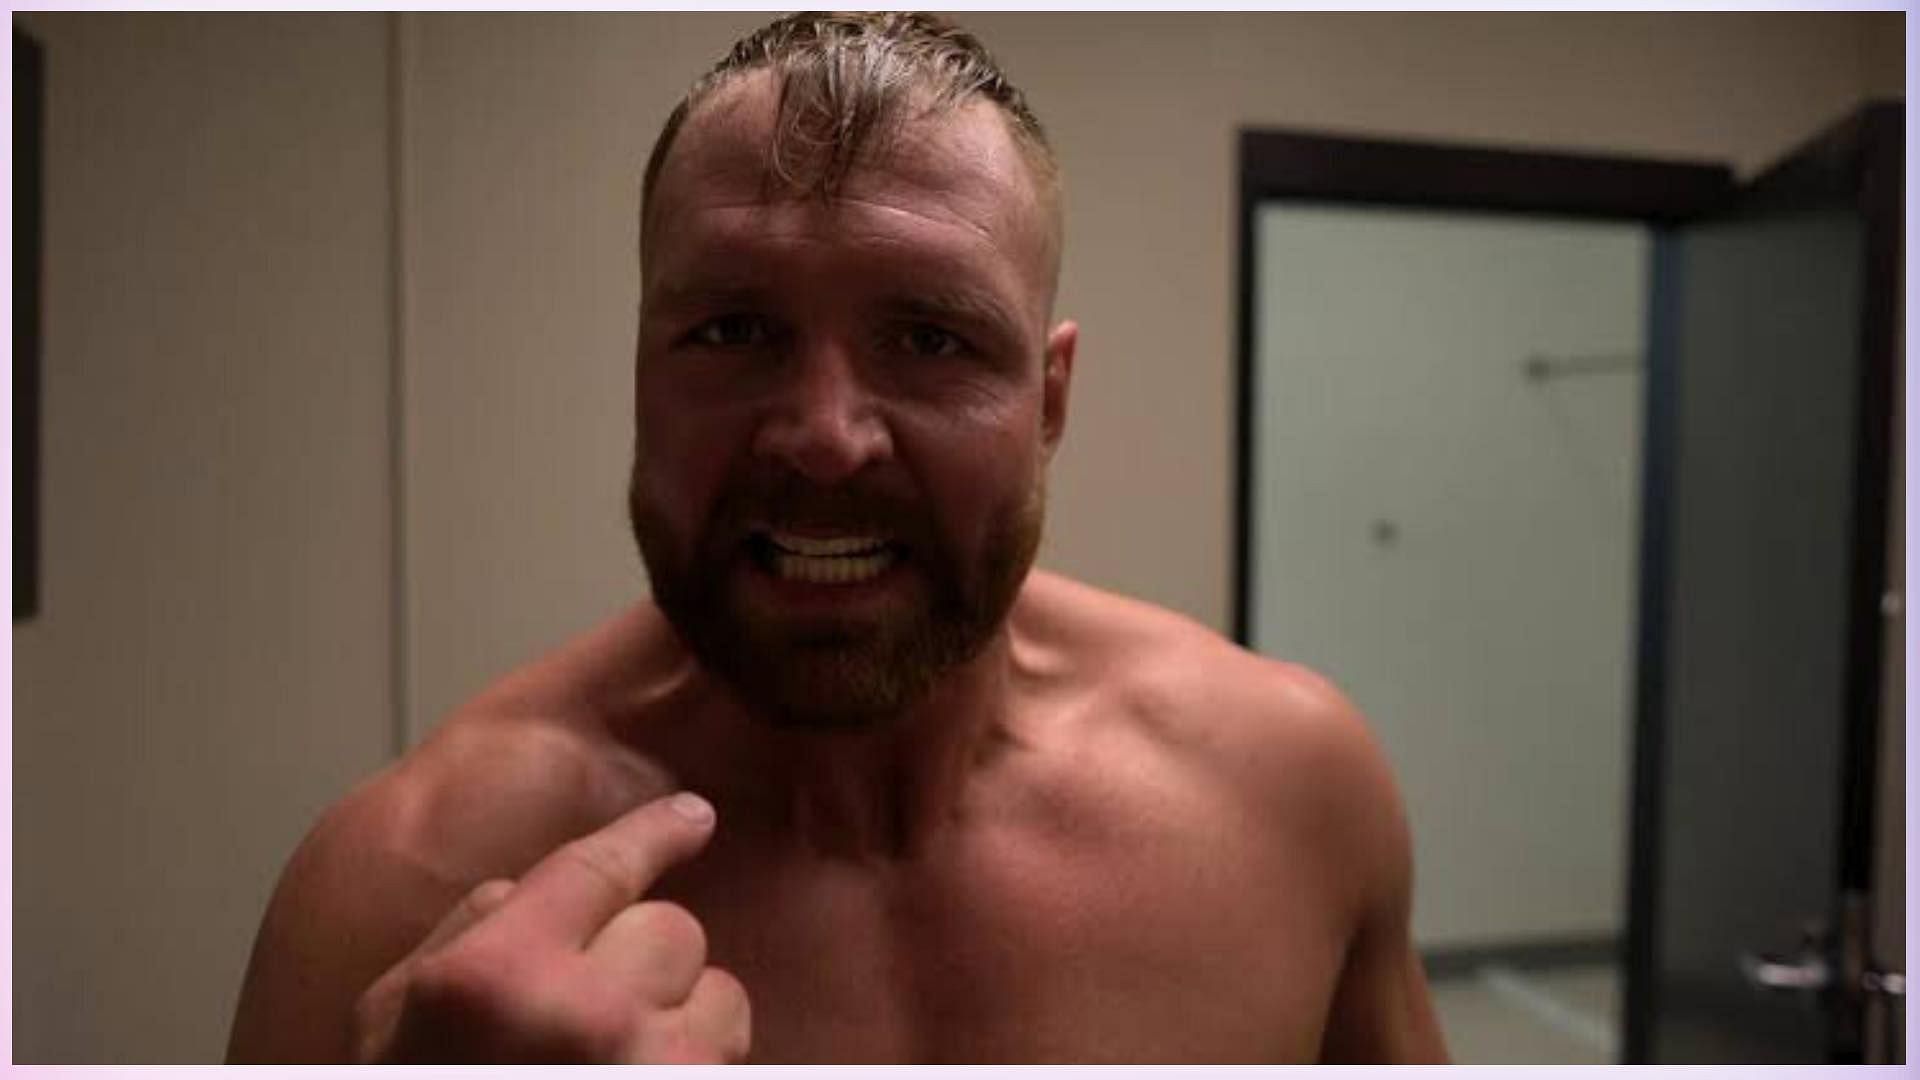 Jon Moxley is a former AEW World Champion